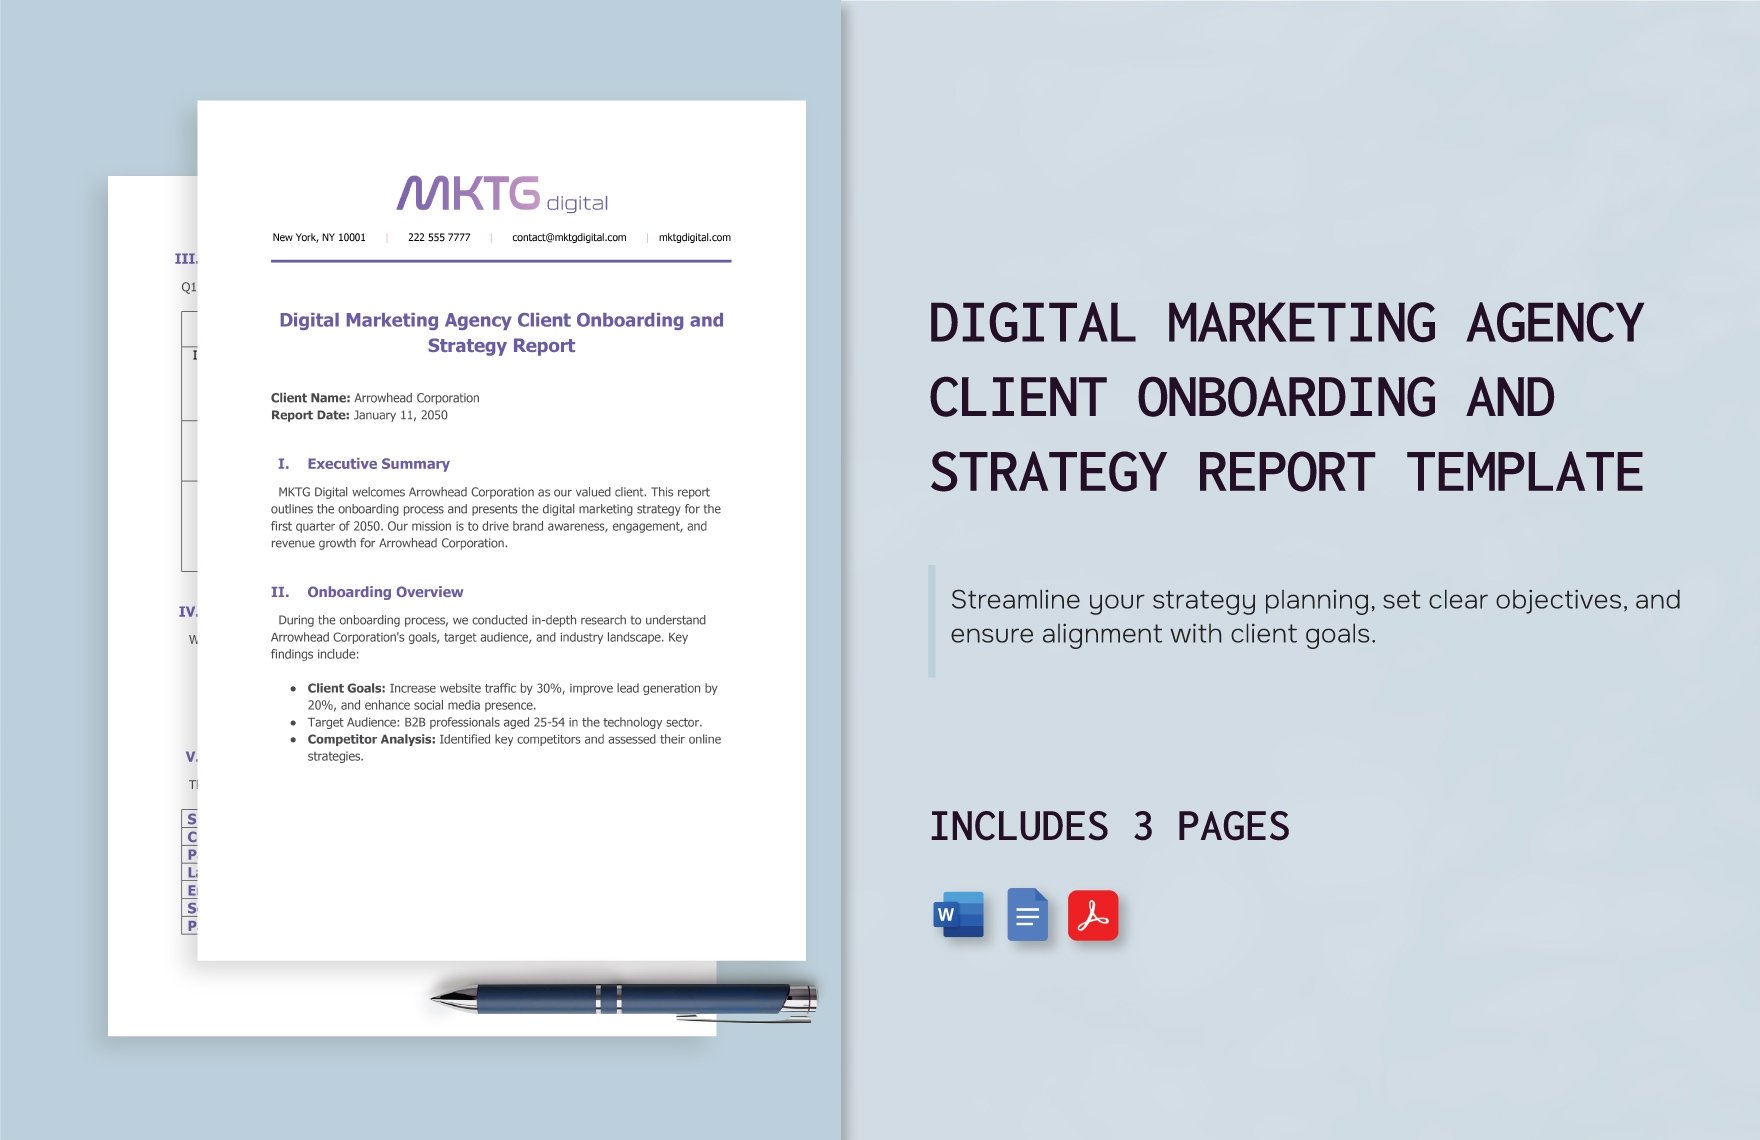 Digital Marketing Agency Client Onboarding and Strategy Report Template